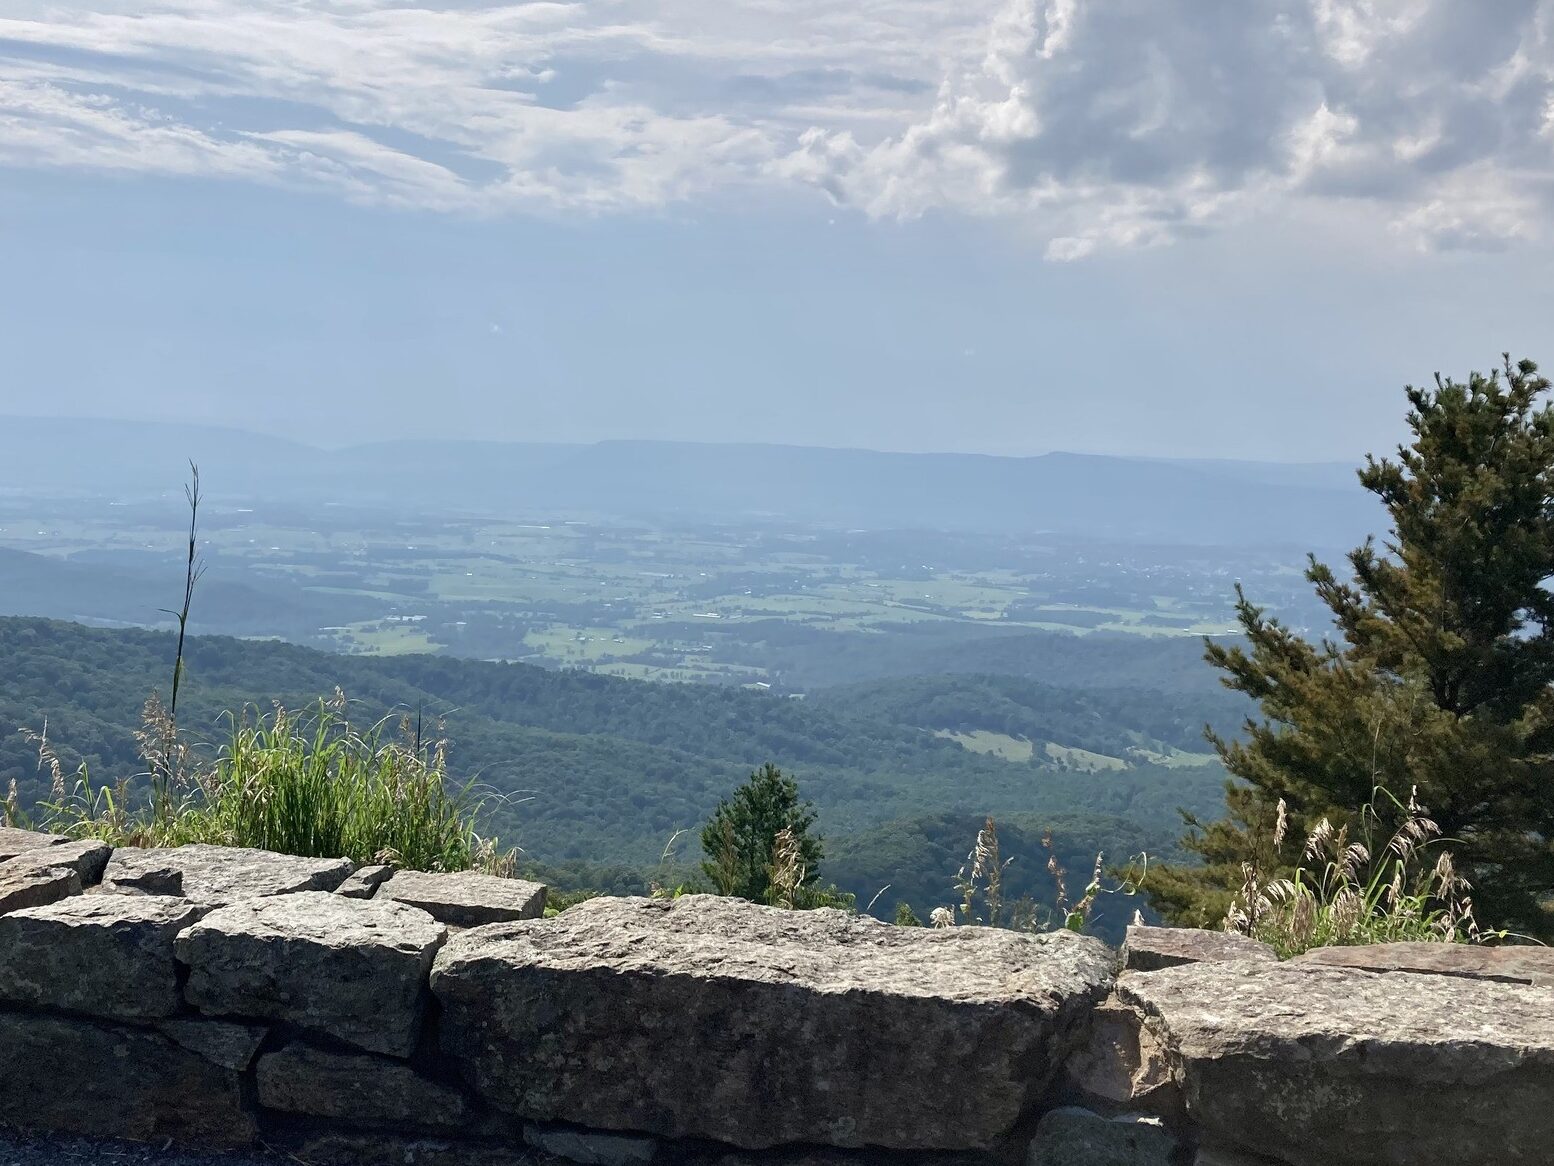 The view from Stony Man Overlook on Skyline Drive